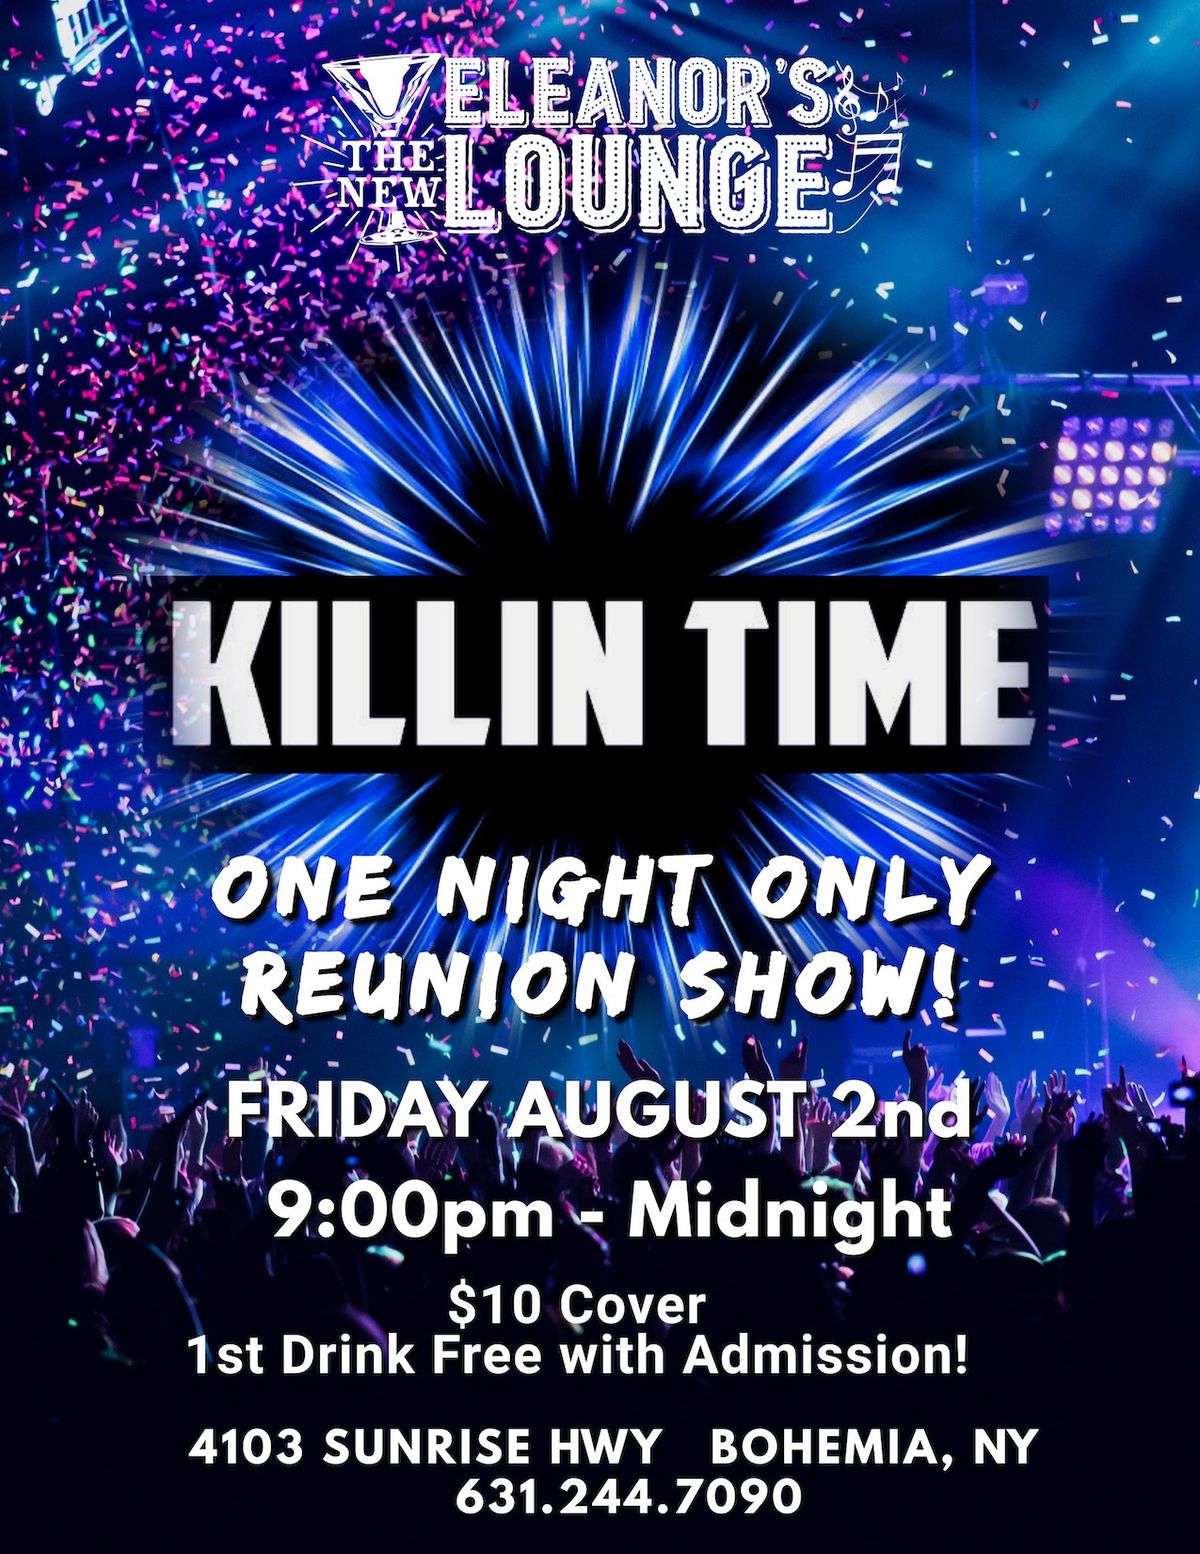 Killin' Time - One Night Only Reunion Show!